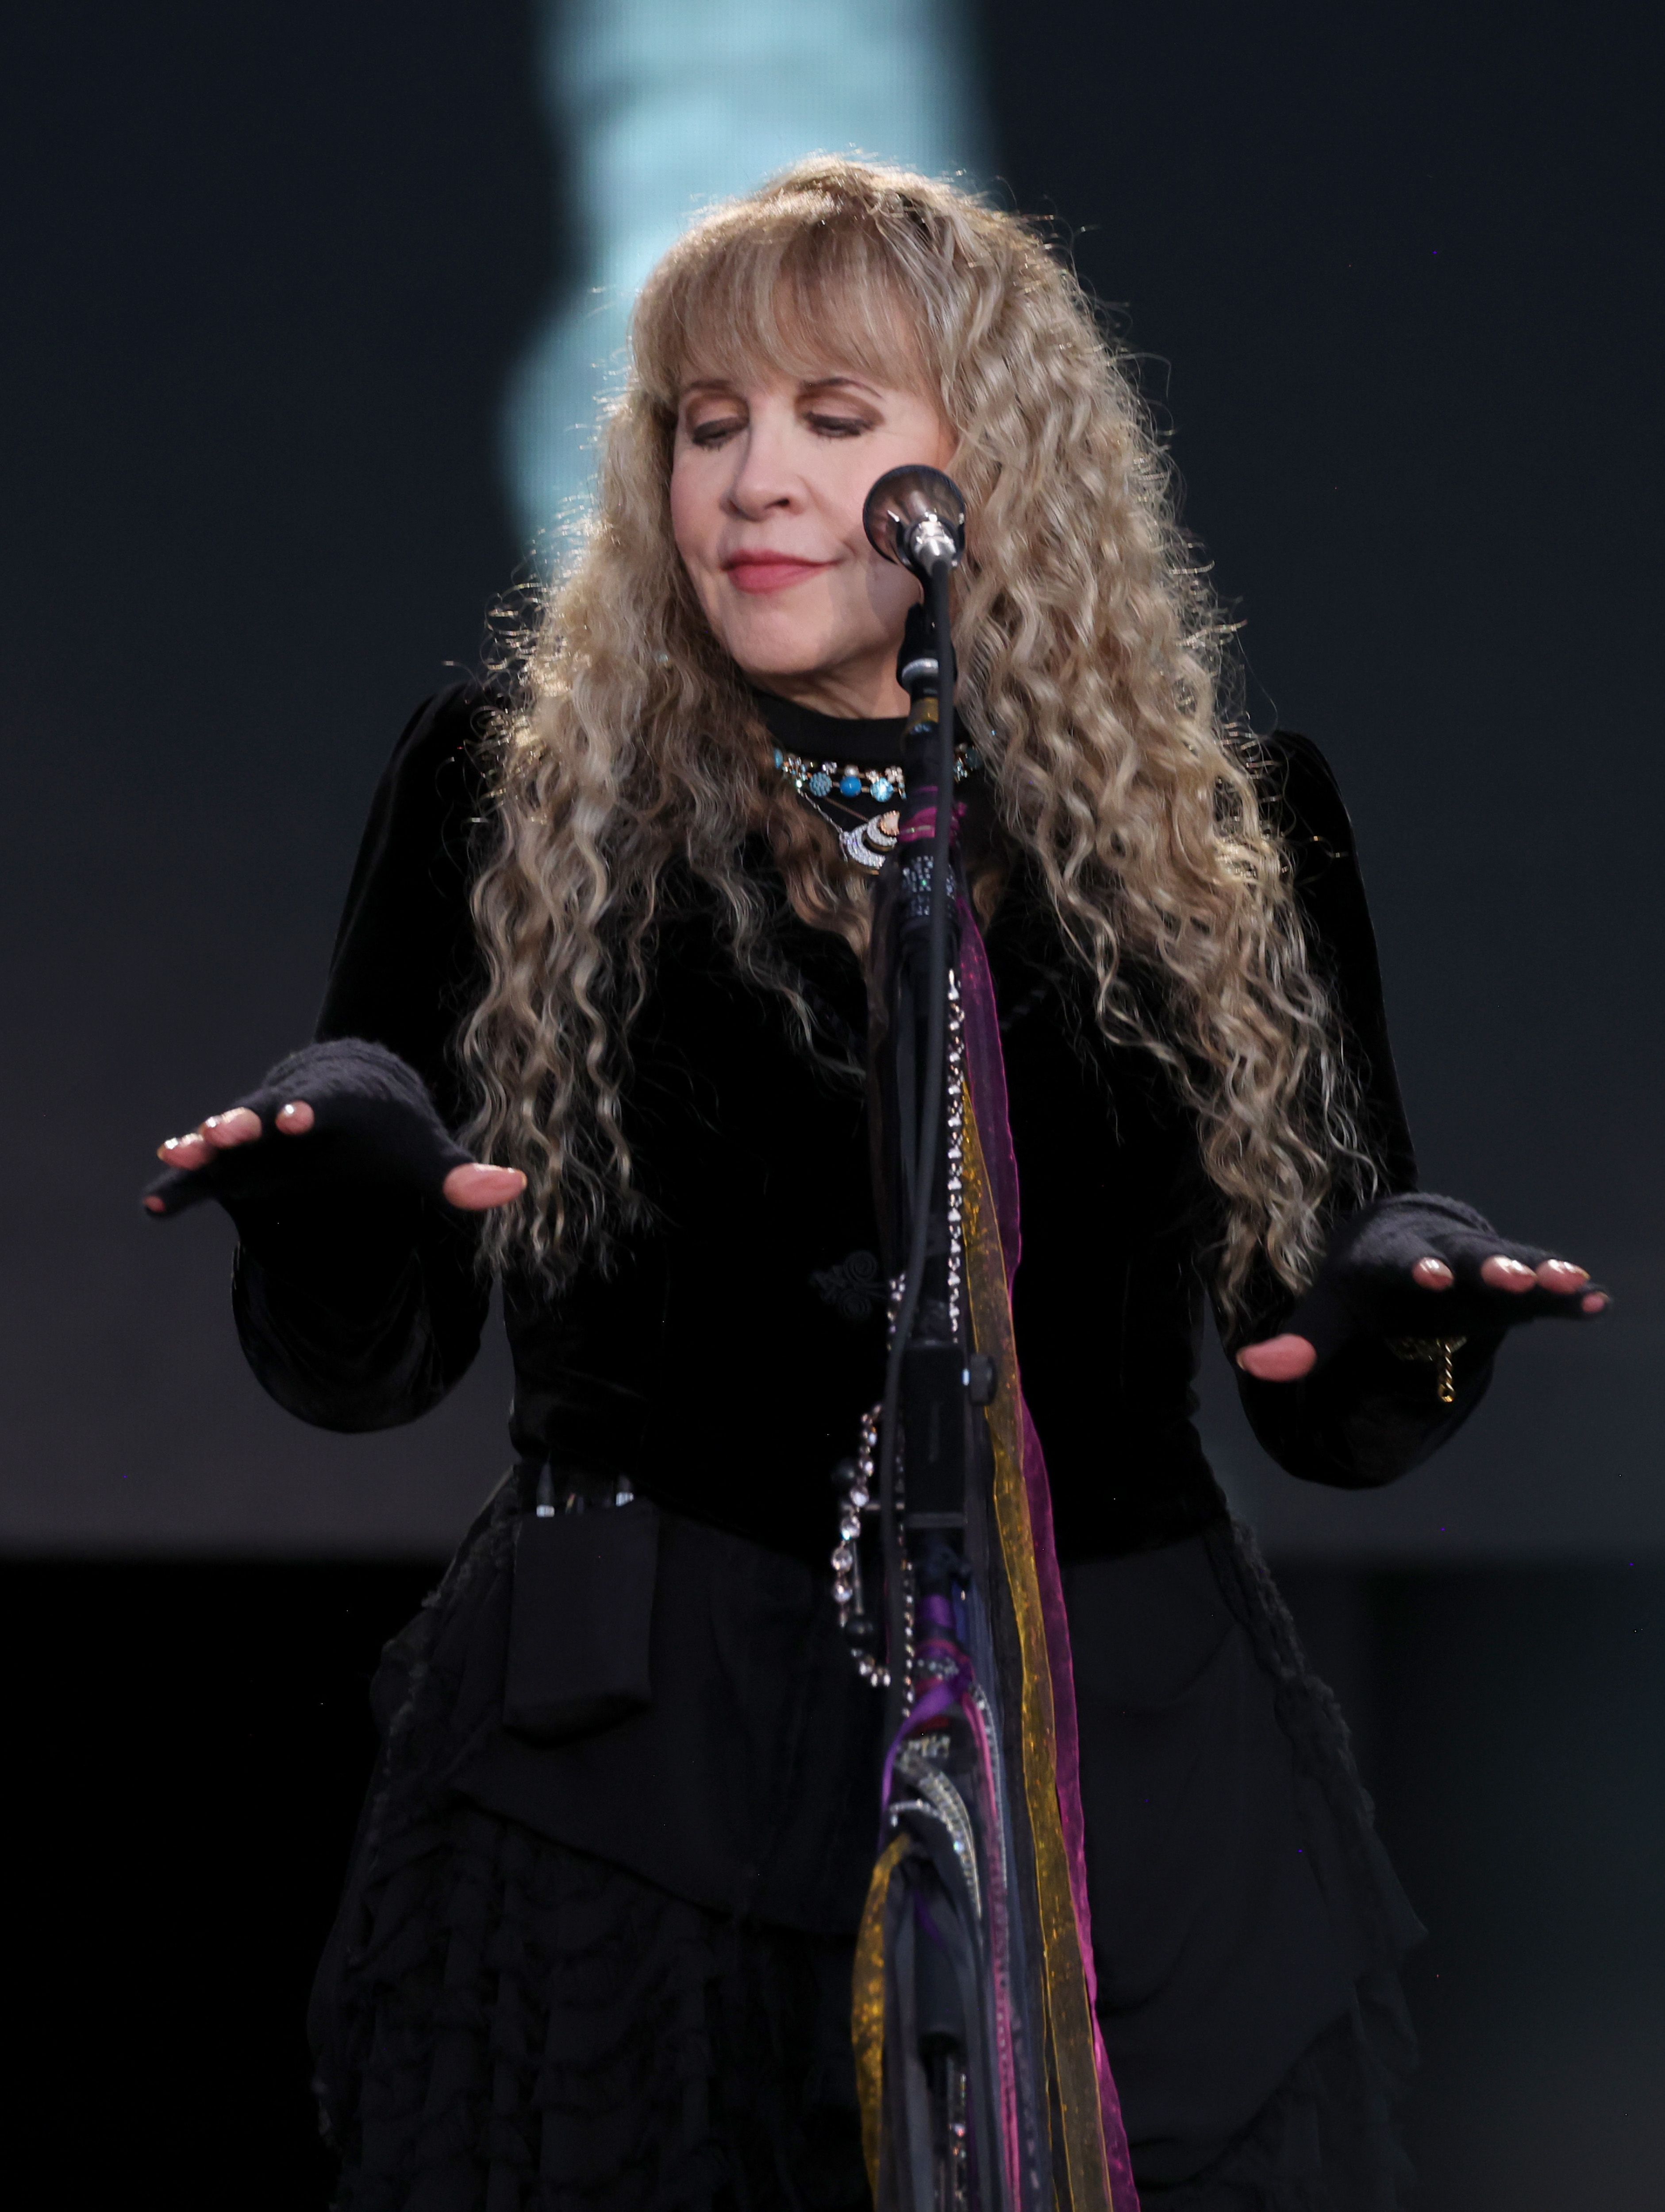 The Fleetwood Mac frontwoman has had a wildly successful music career and was inducted into the Rock & Roll Hall of Fame twice